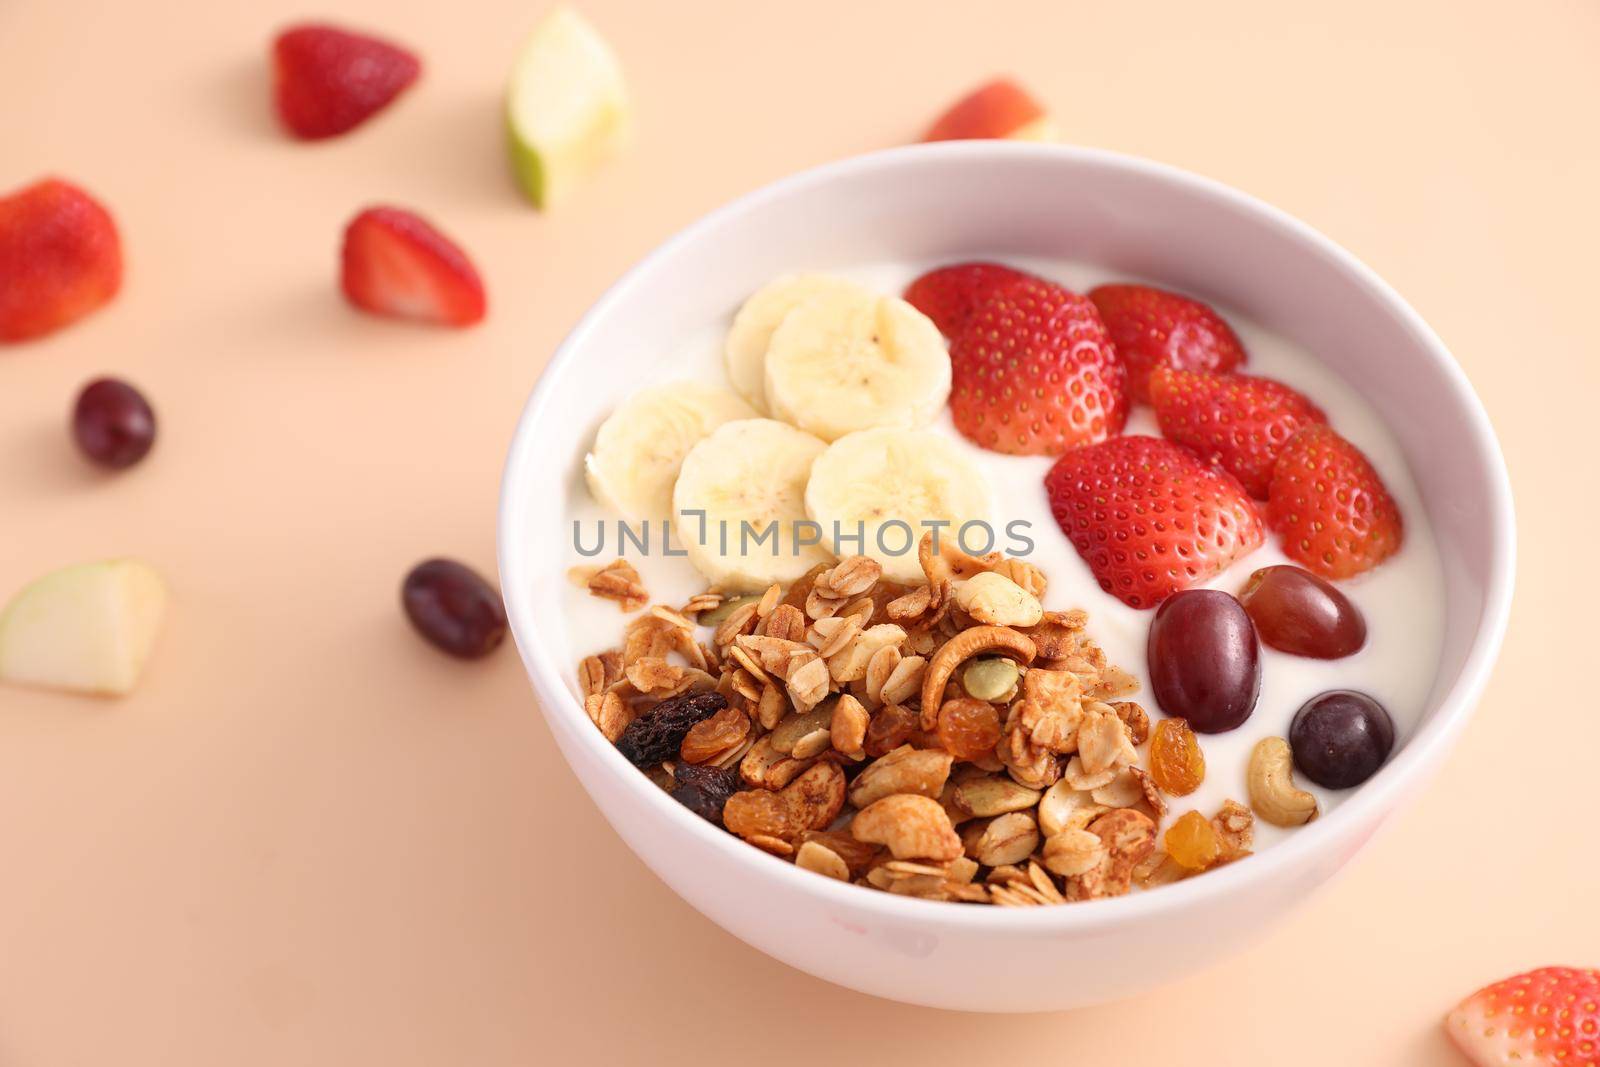 bowl of granola cereal with yogurt and berries isolated on eggnog color background